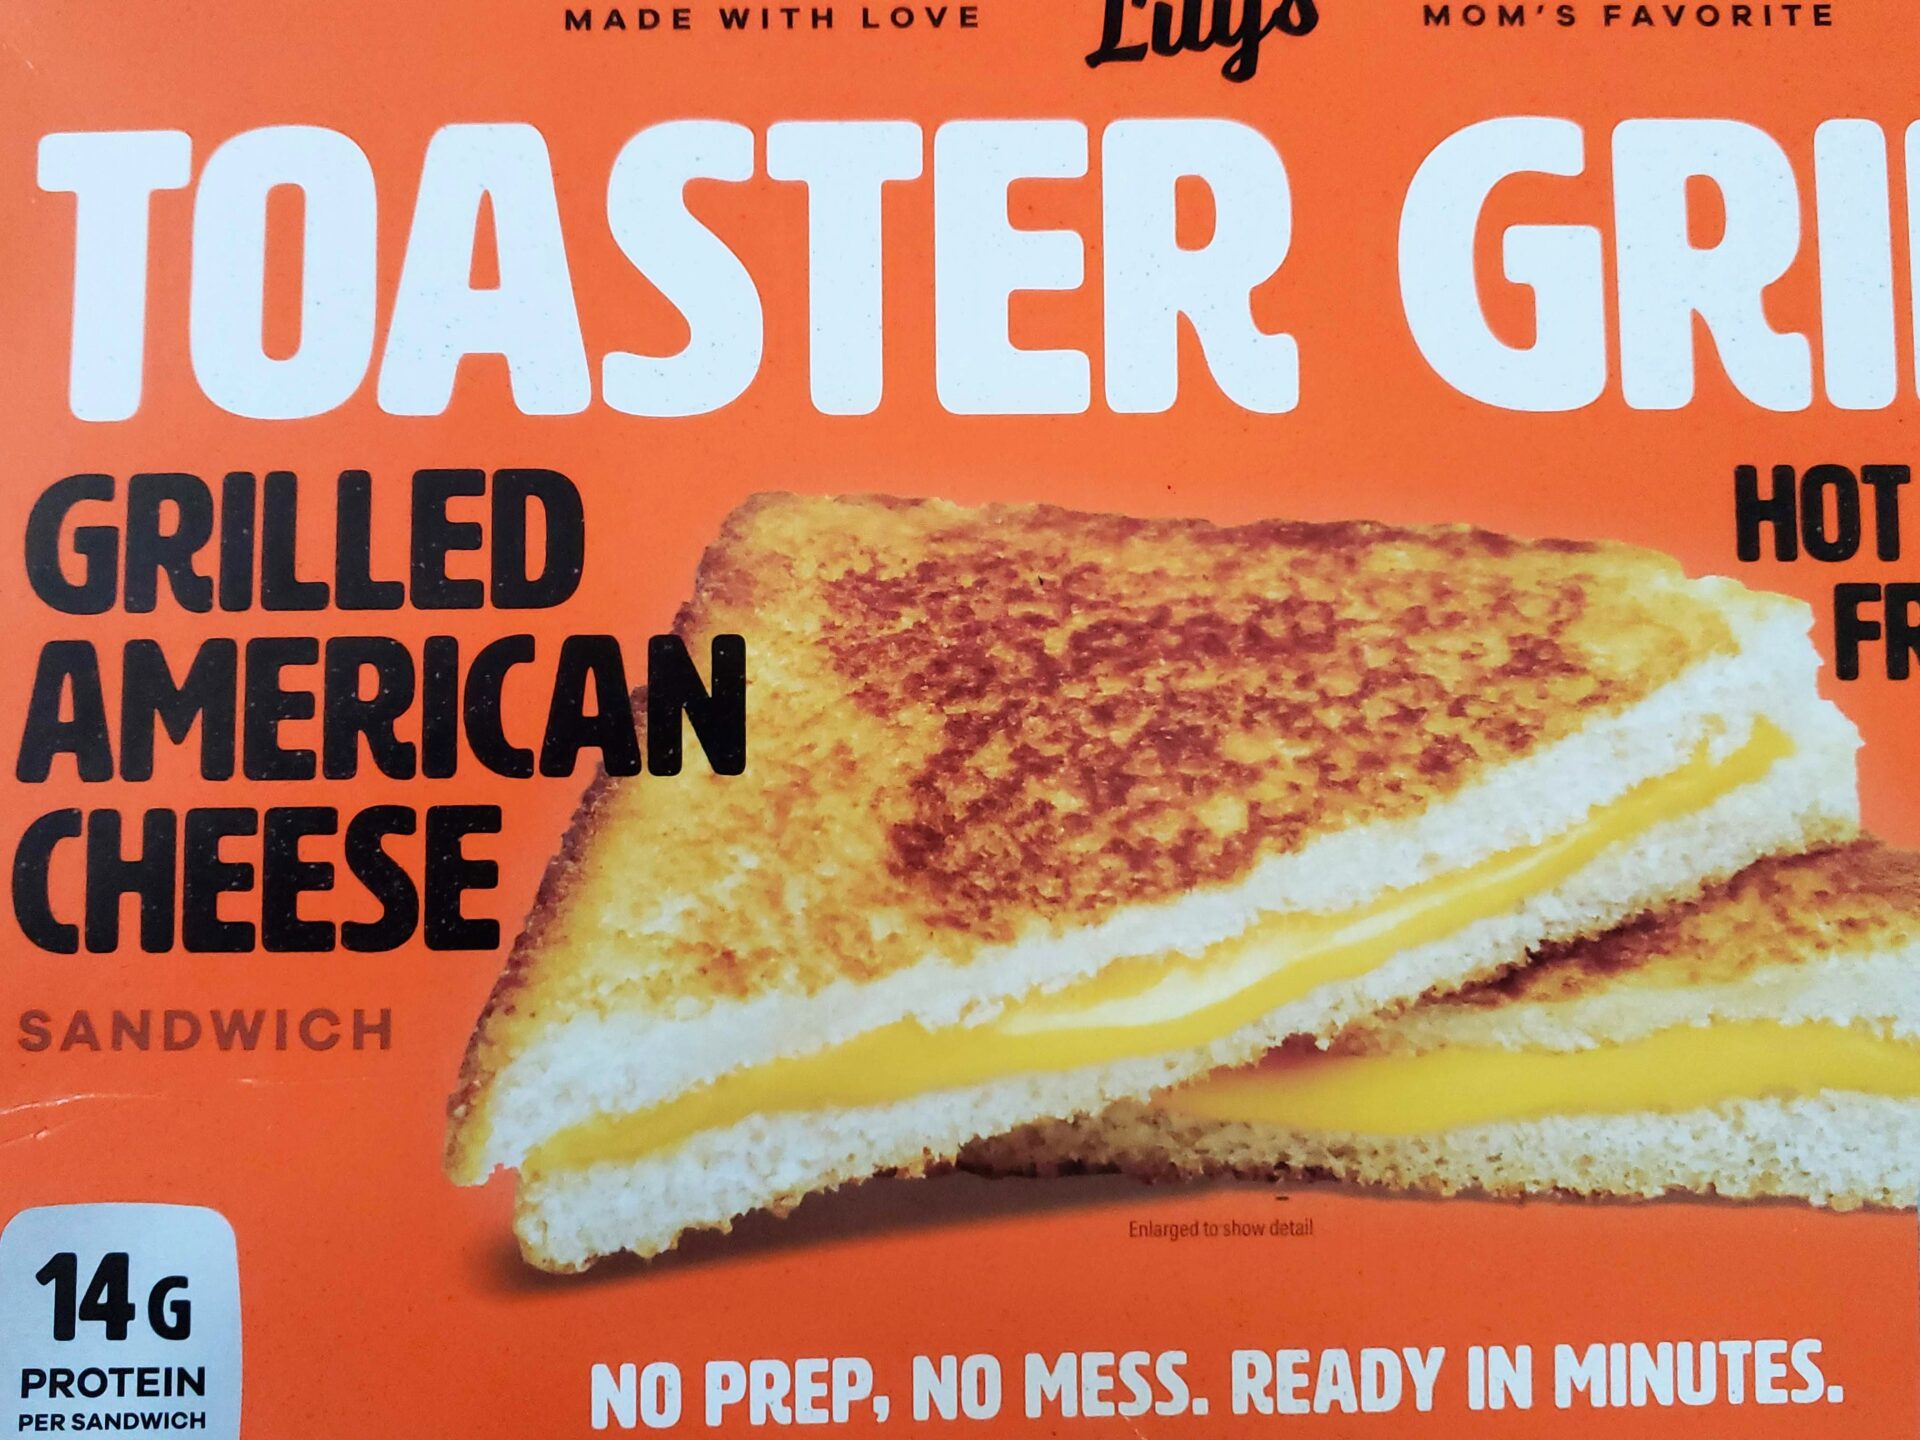 Lilys-Grilled-American-Cheese-Sandwich